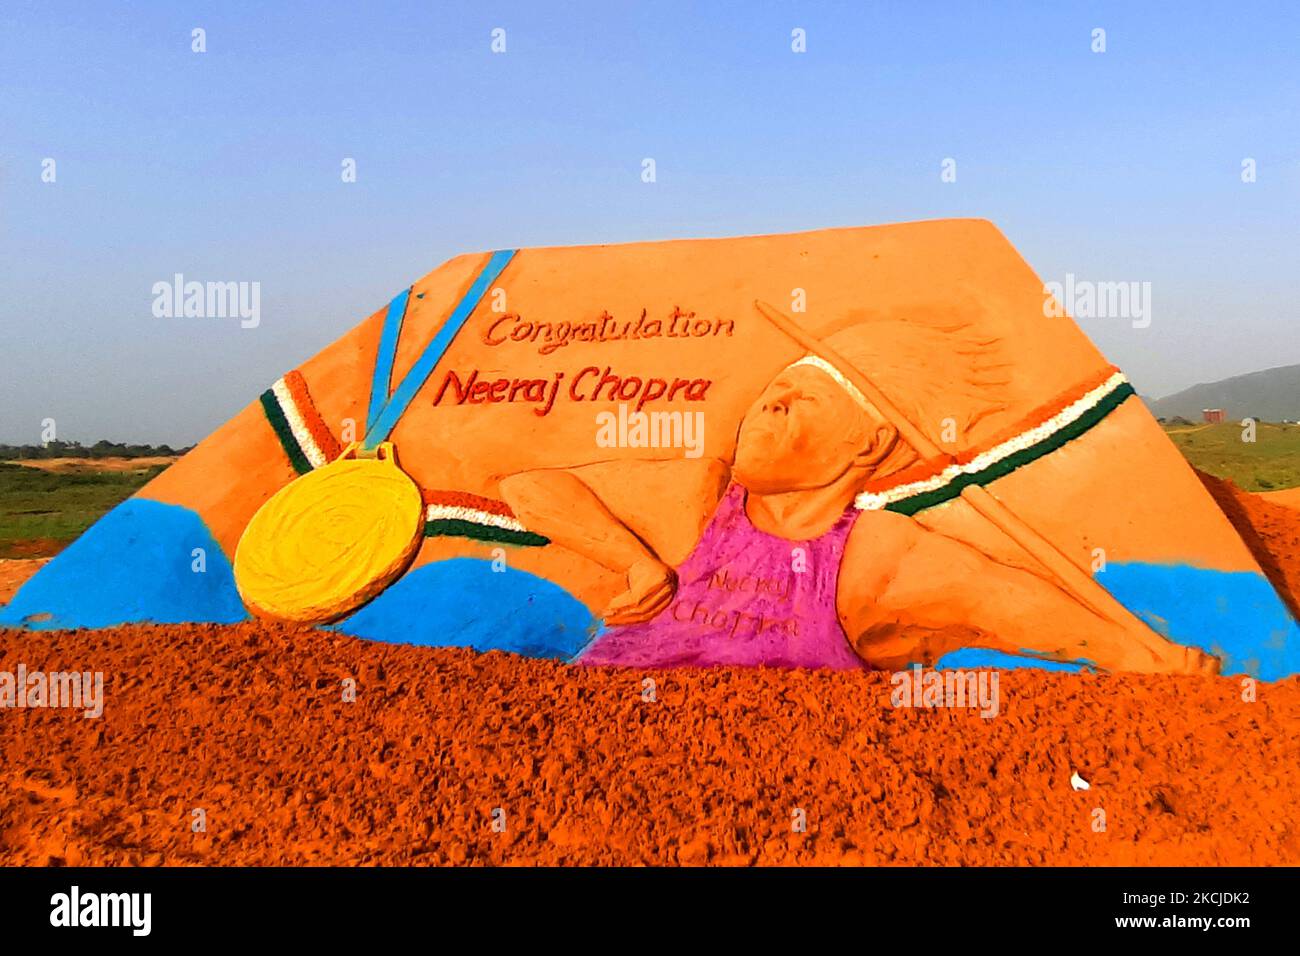 Sand Artist Ajay Rawat Create a sand sculpture to Congratulate ''Neeraj Chopra'' for winning the Gold Medal in Tokyo Olympics 2020, in Desert of Pushkar, Rajasthan, India on 08 August 2021. (Photo by Himanshu Sharma/NurPhoto) Stock Photo